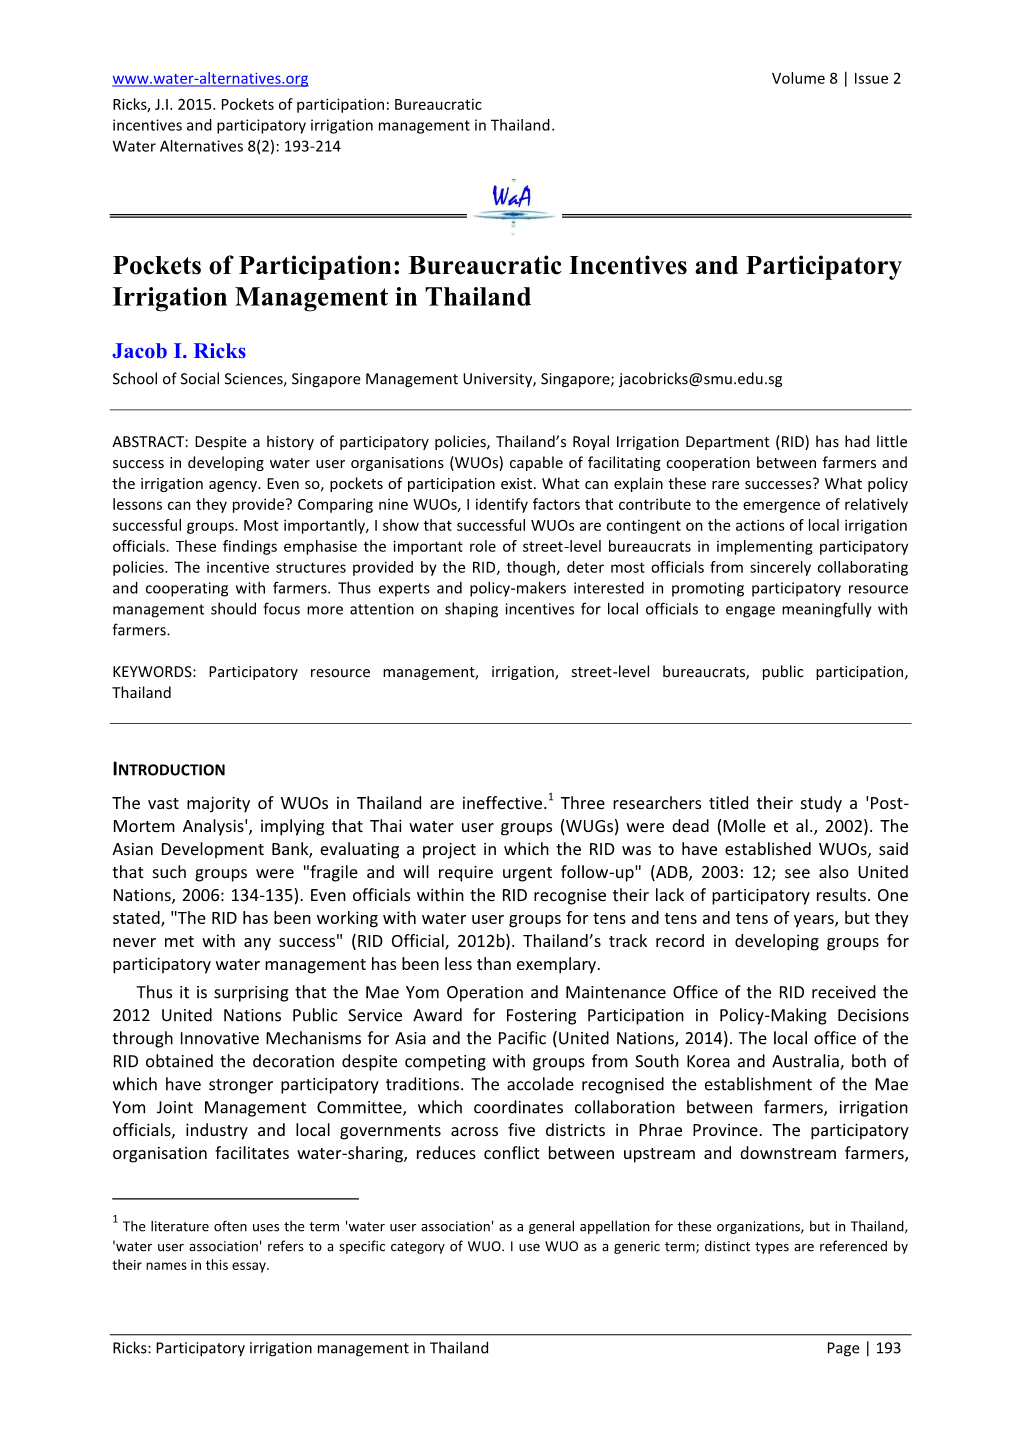 Pockets of Participation: Bureaucratic Incentives and Participatory Irrigation Management in Thailand